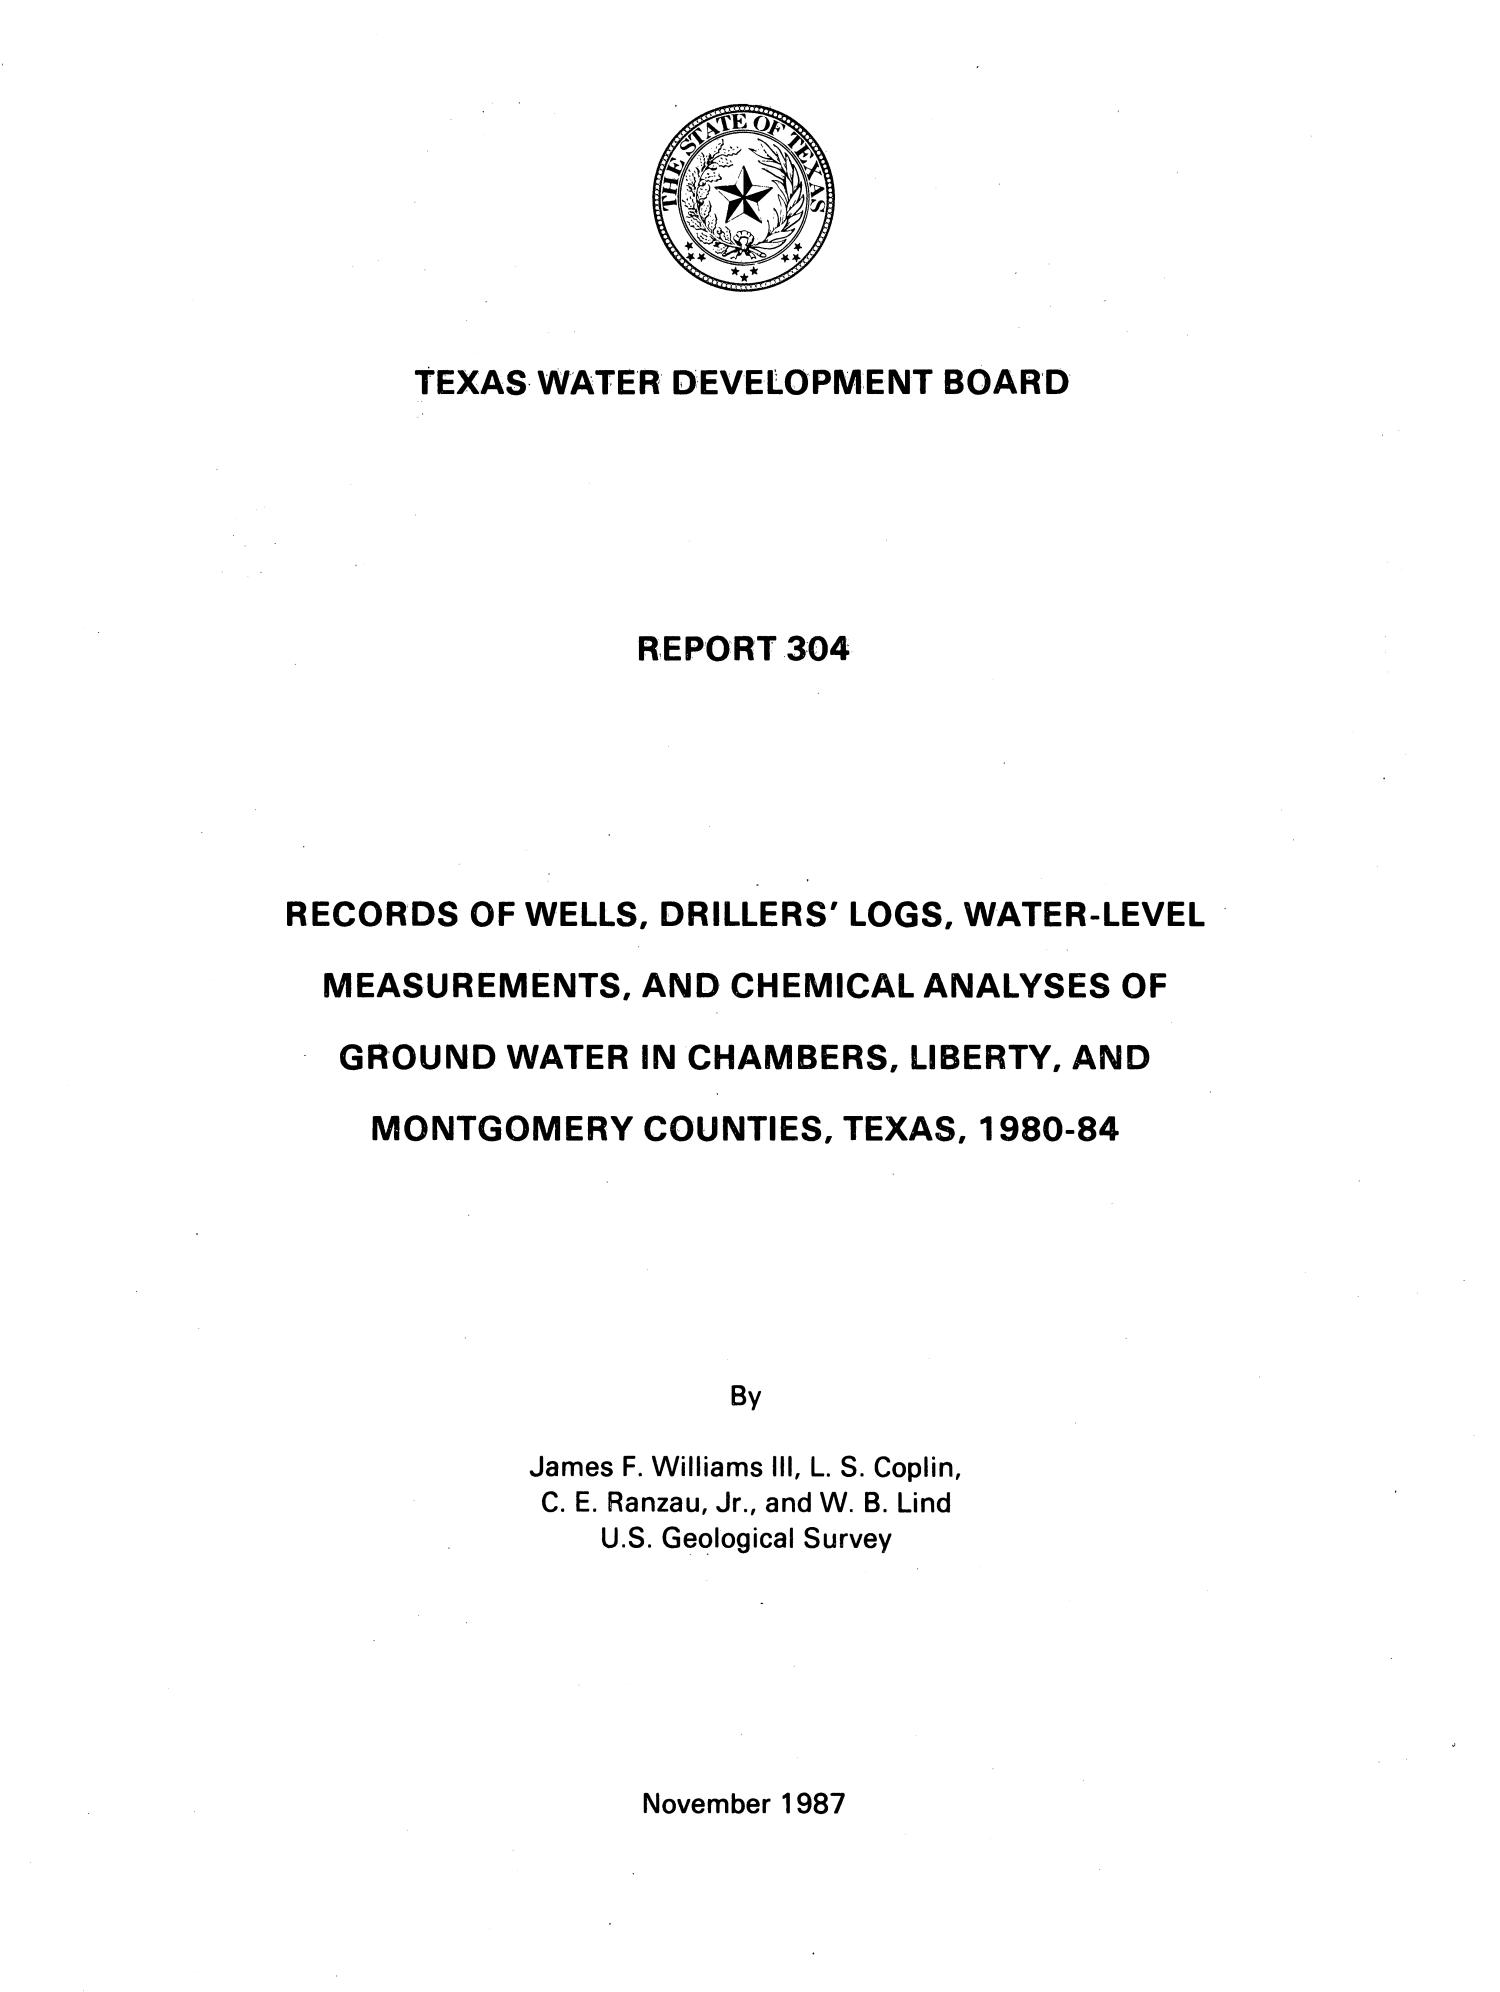 Records of Wells, Drillers' Logs, Water-Level Measurements, and Chemical Analyses of Ground Water in Chambers, Liberty, and Montgomery Counties, Texas, 1980-84
                                                
                                                    TITLE PAGE
                                                